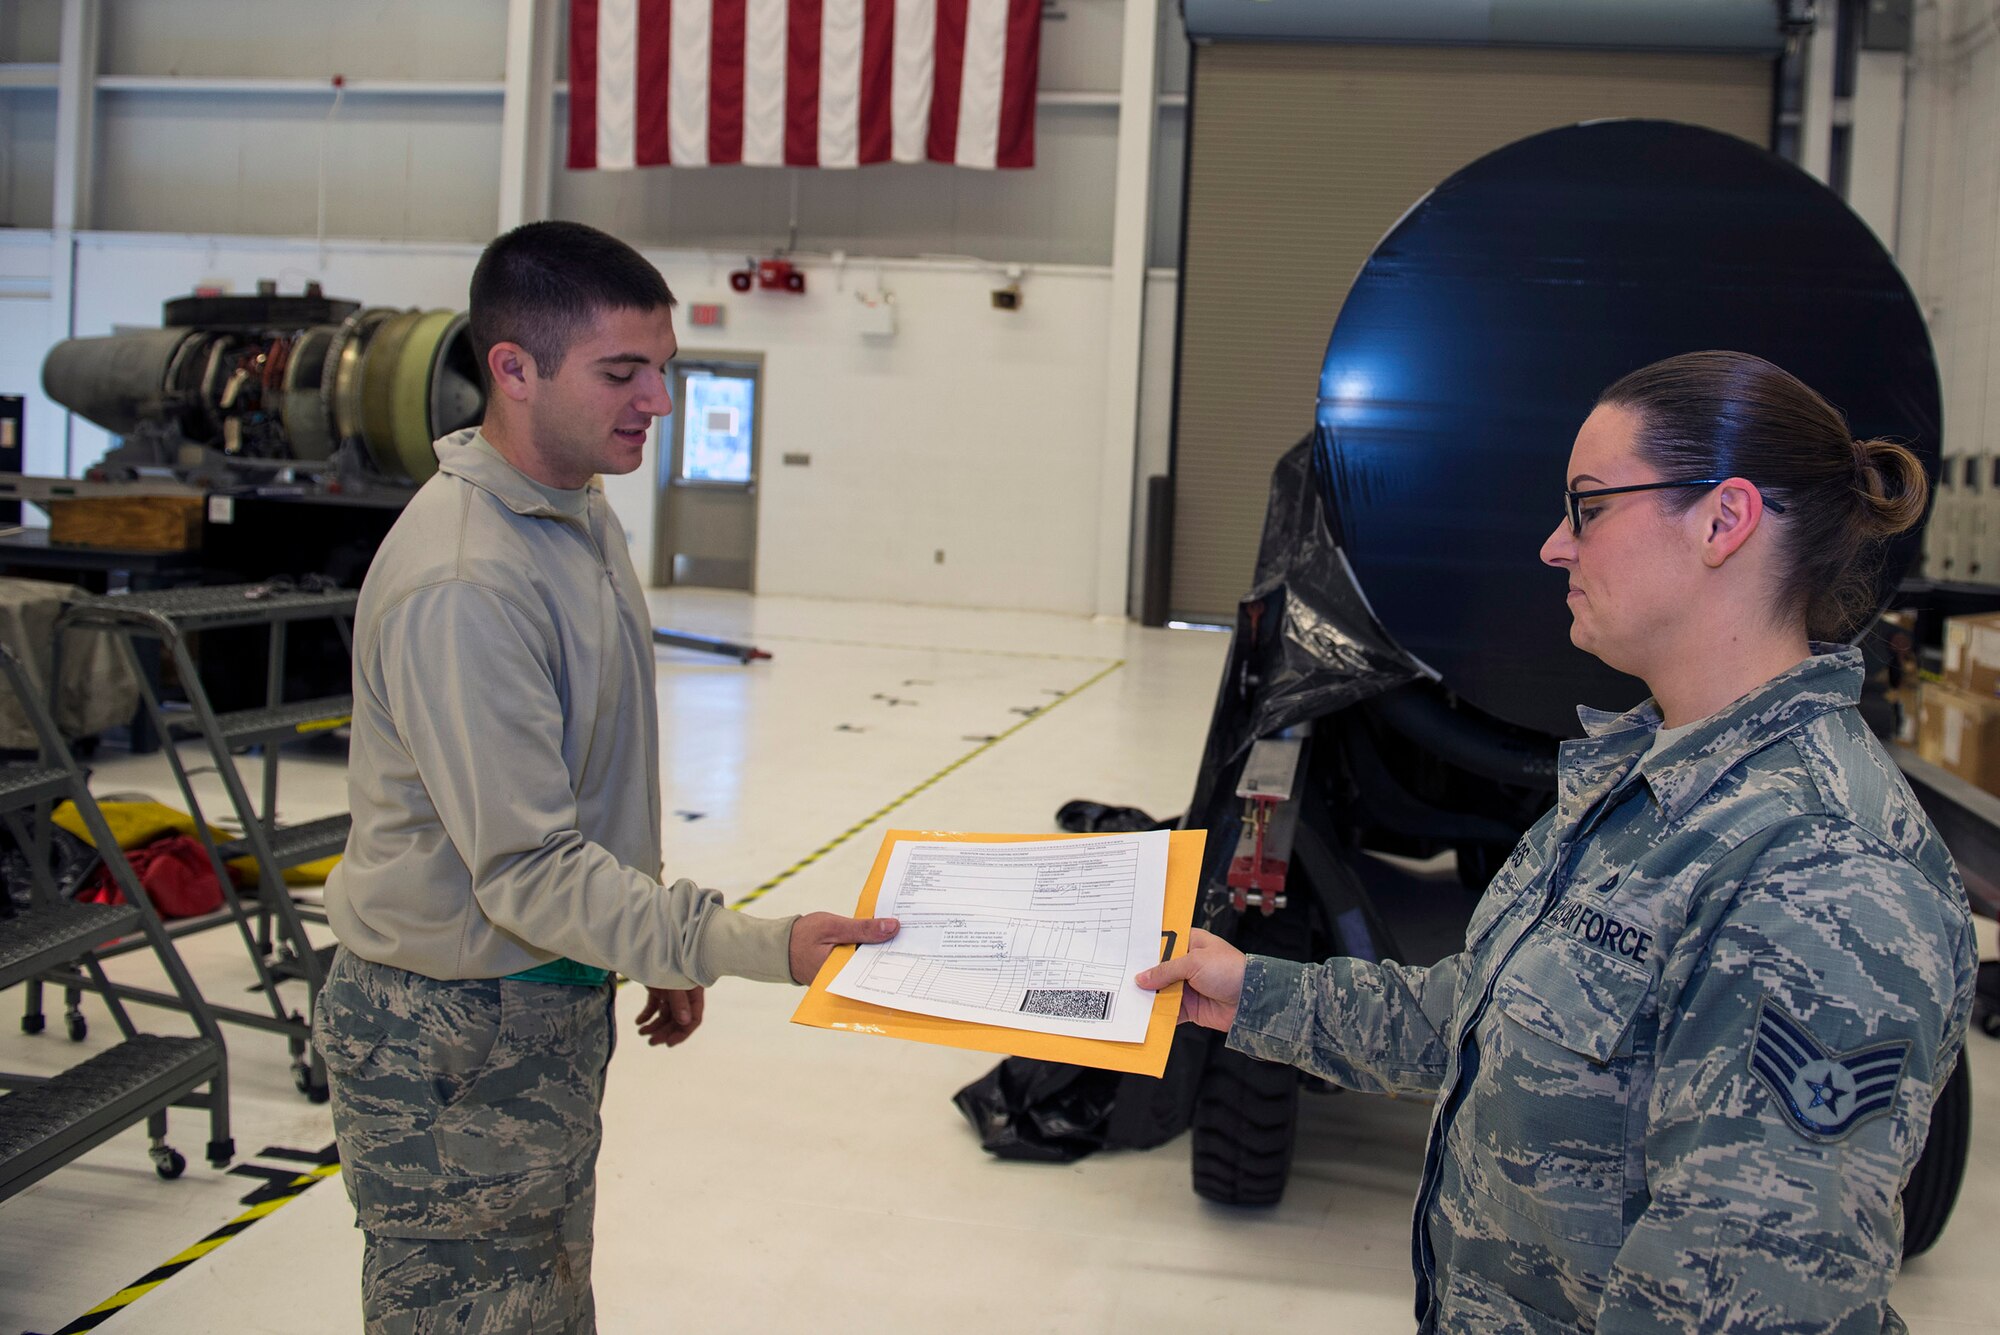 U.S. Air Force Senior Airman Anthony Armelli, 23d Component Maintenance Squadron aerospace propulsion flight journeyman, receives an Air Force Technical Order Form 95 from Staff Sgt. Amanda Griggs, 23d Maintenance Operations Flight engine management engine manager, Jan. 12, 2016, at Moody Air Force Base, Ga. The form contained a TF-34 engine’s maintenance history prior to transporting to Joint Base McGuire-Dix-Lakehurst, N.J., in support of the 74th Fighter Squadron. (U.S. Air Force photo by Airman 1st Class Greg Nash/Released